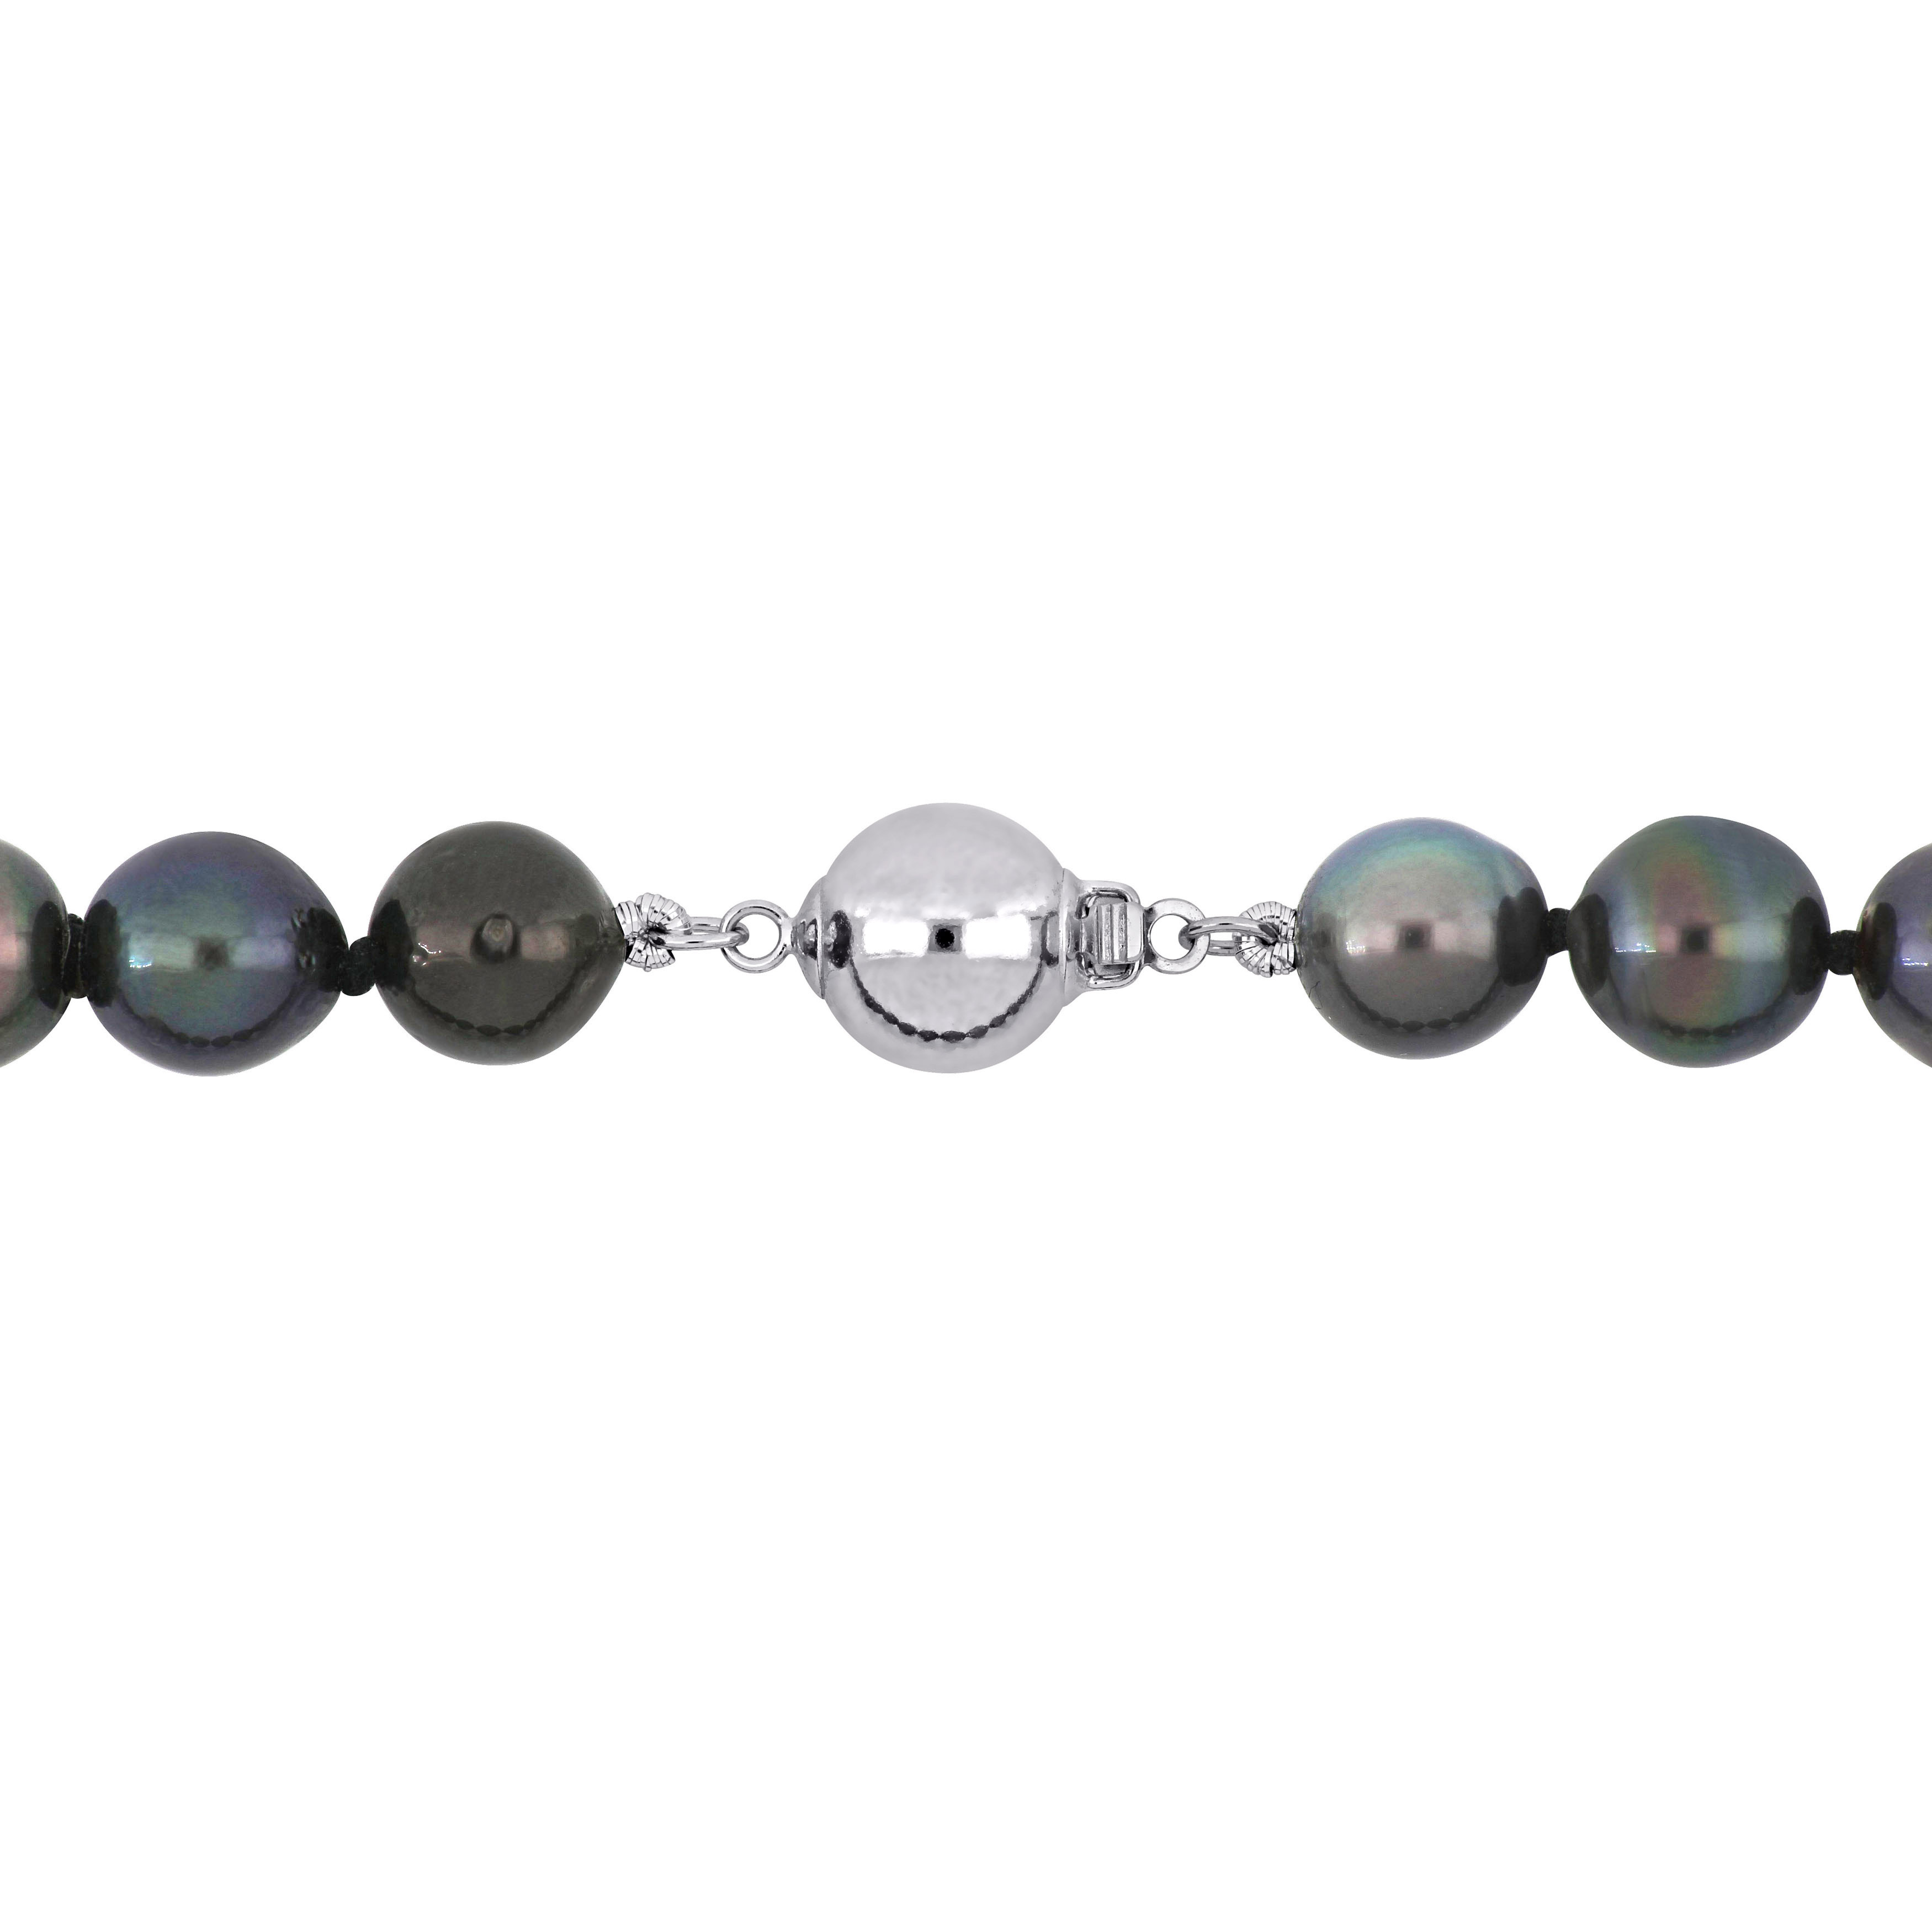 8-10 MM Black Tahitian Cultured Pearl Strand Necklace in Sterling Silver - 18 in